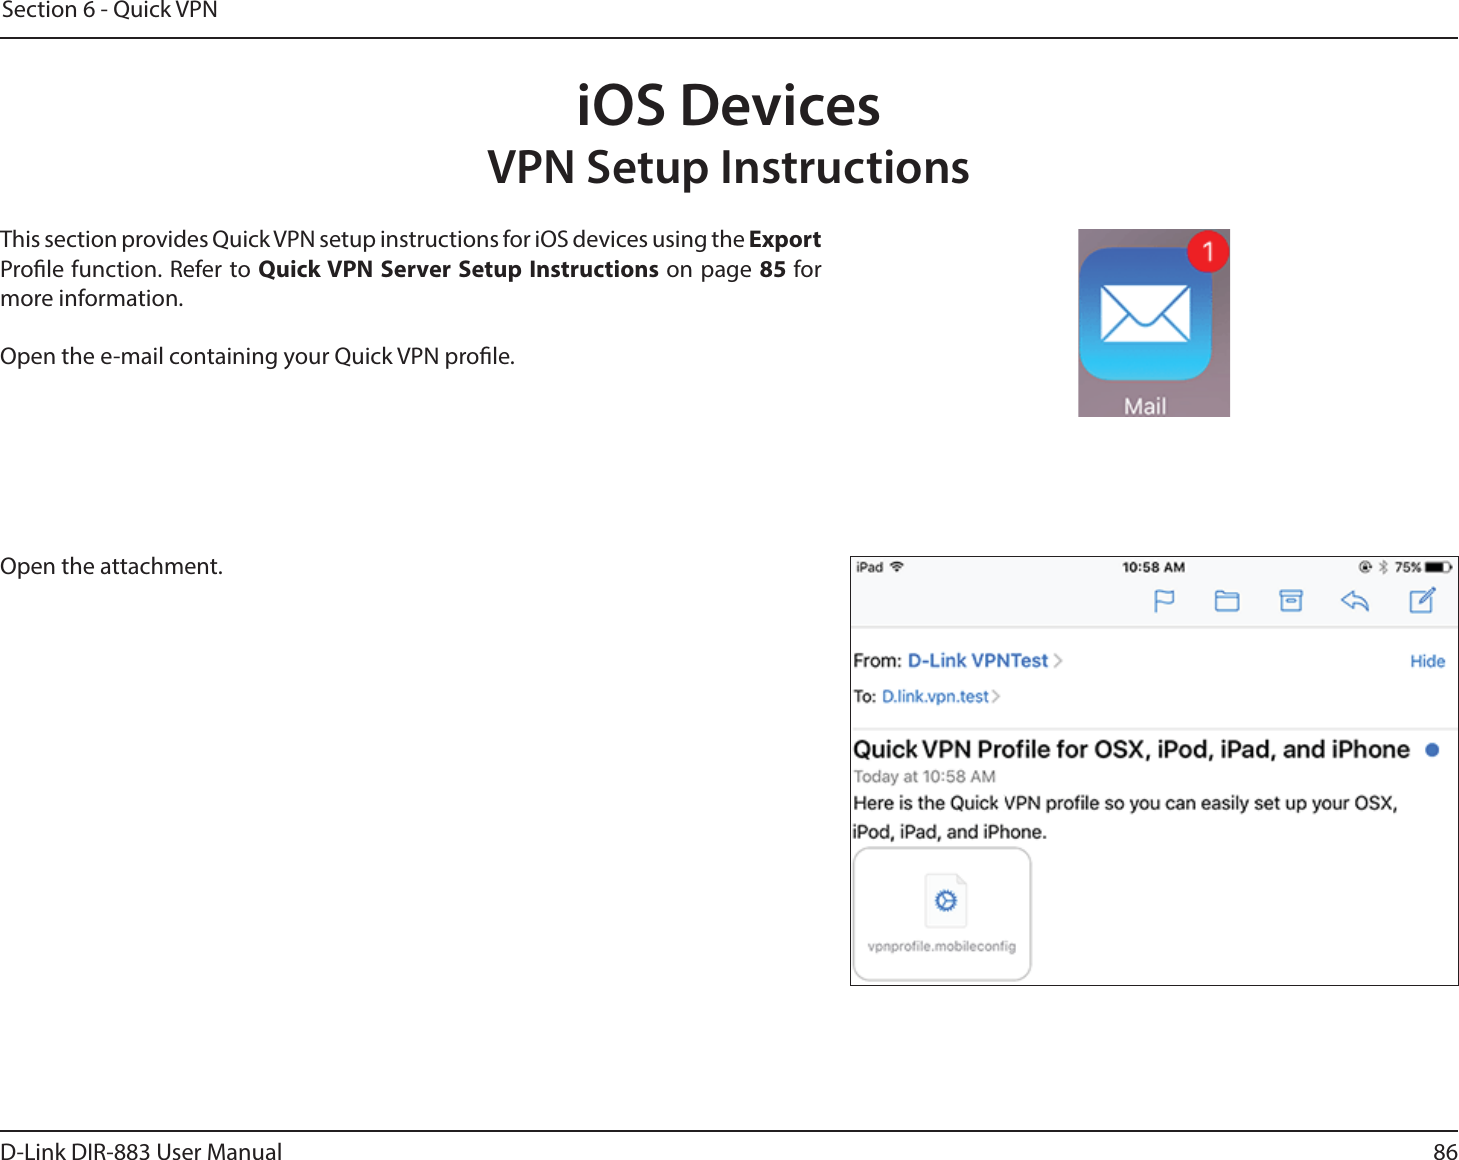 86D-Link DIR-883 User ManualSection 6 - Quick VPNiOS DevicesVPN Setup InstructionsThis section provides Quick VPN setup instructions for iOS devices using the Export Prole function. Refer to Quick VPN Server Setup Instructions on page 85 for more information.Open the e-mail containing your Quick VPN prole.Open the attachment. 